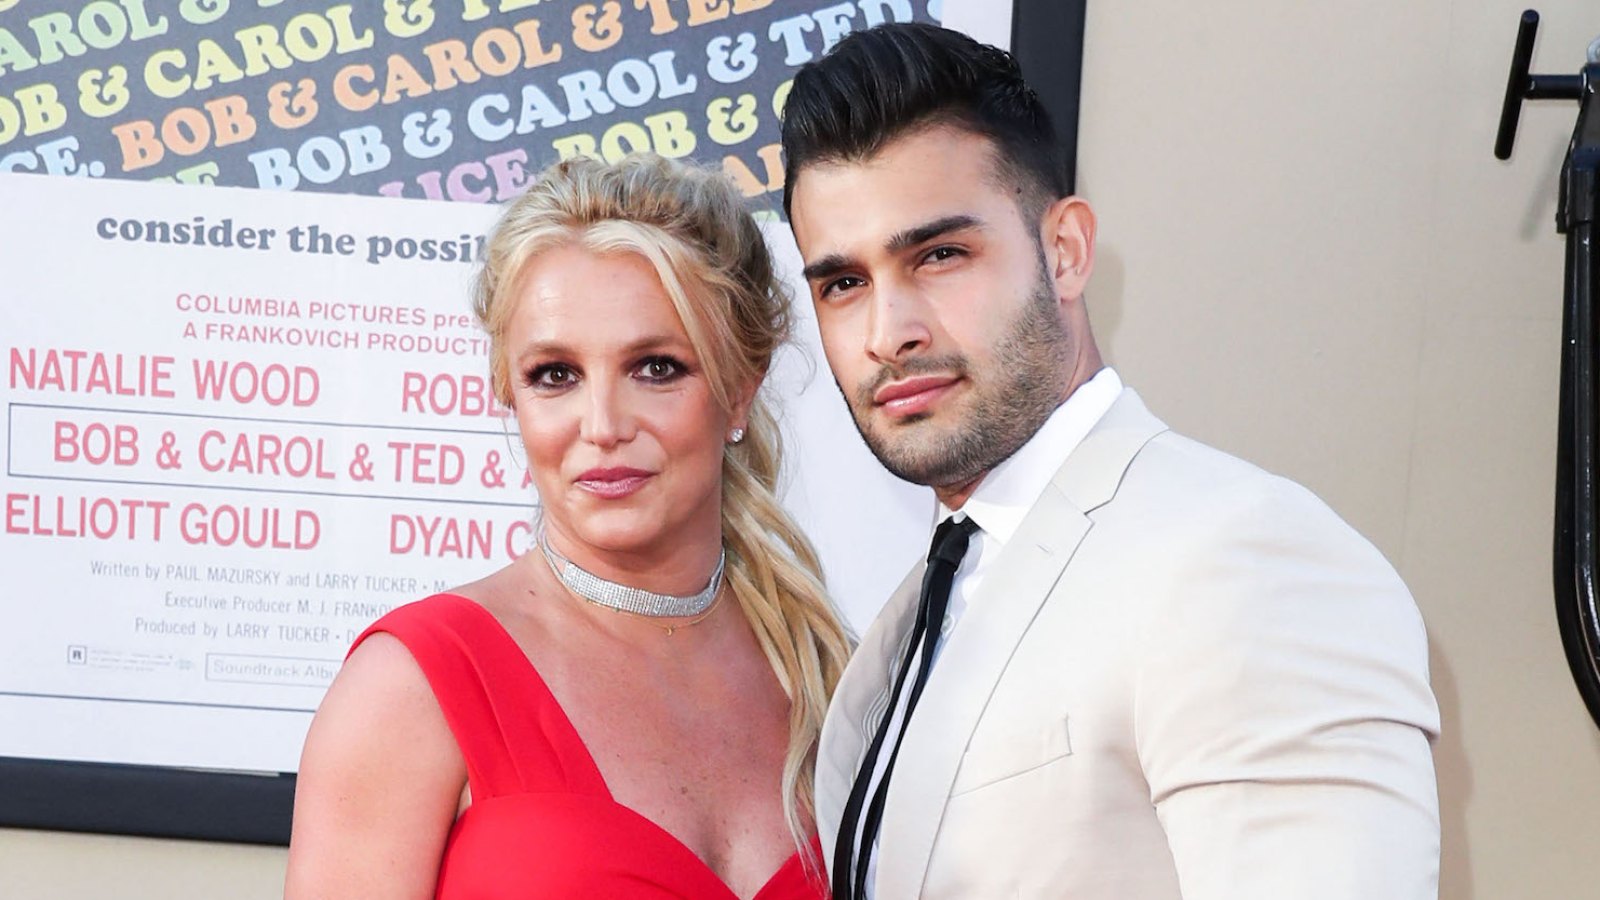 Britney Spears and Sam Asghari's Marriage Is 'Going Great' Despite Breakup Speculation: They 'Love Each Other Deeply'